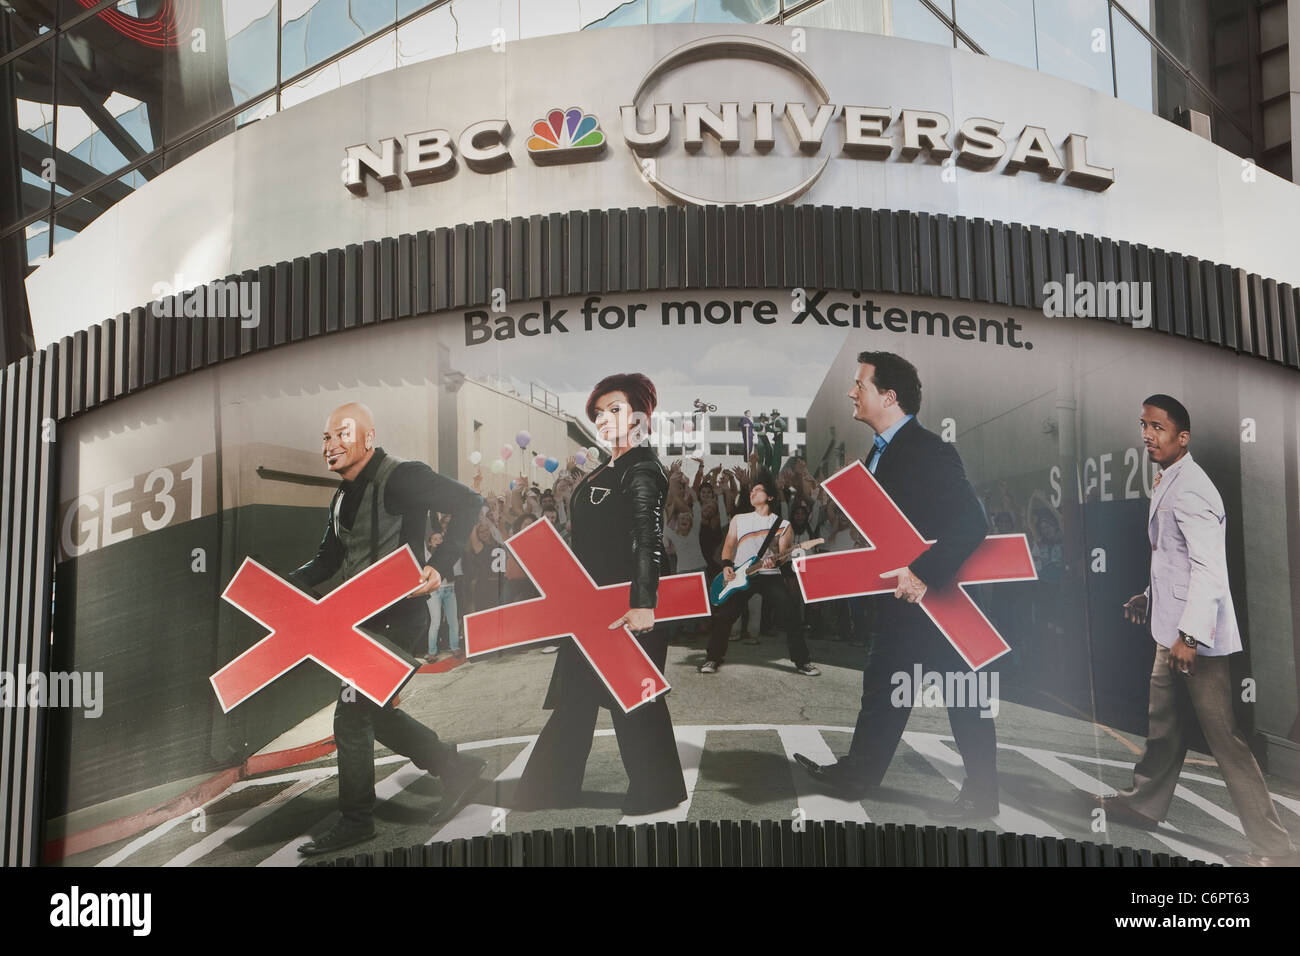 An advertising board for the NBC show America's Got Talent in the New York City borough of Manhattan Stock Photo